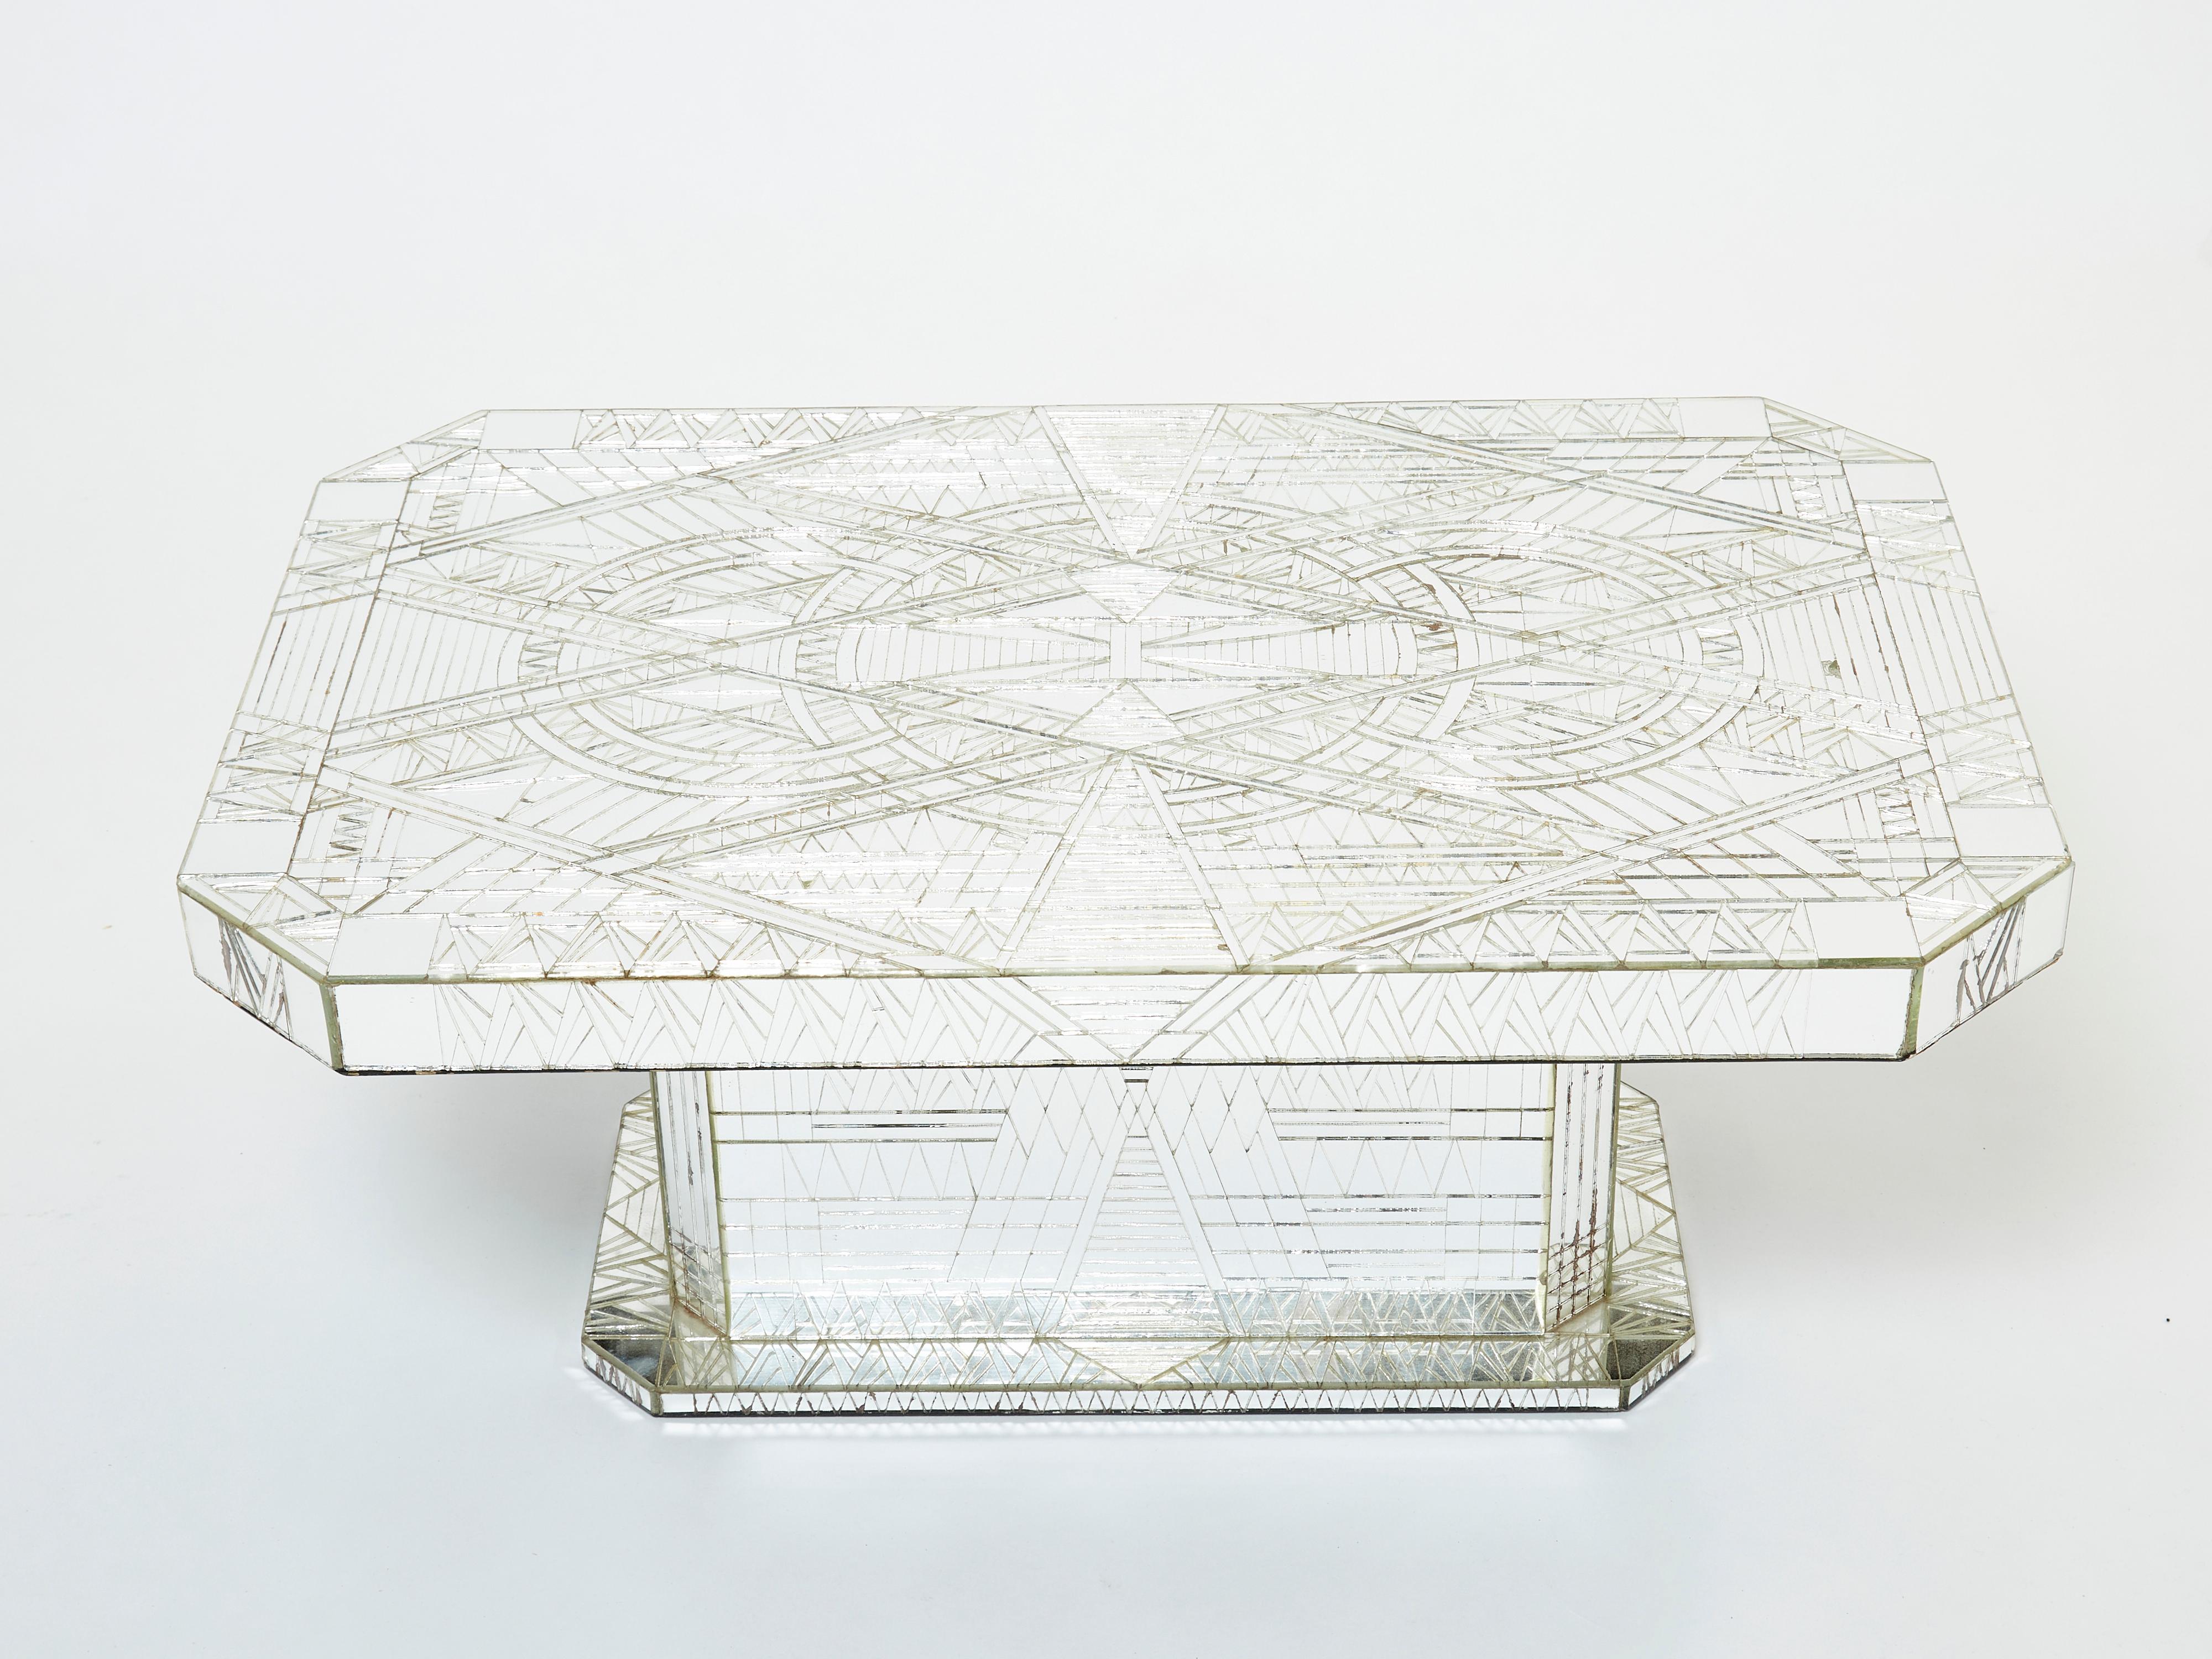 The artful design of this small coffee table made by Daniel Clément in the 1970s was brought to life with hundreds of carved mirror pieces, arranged to form a tight mosaic. The mosaic is so precise that the design almost seems to have been created